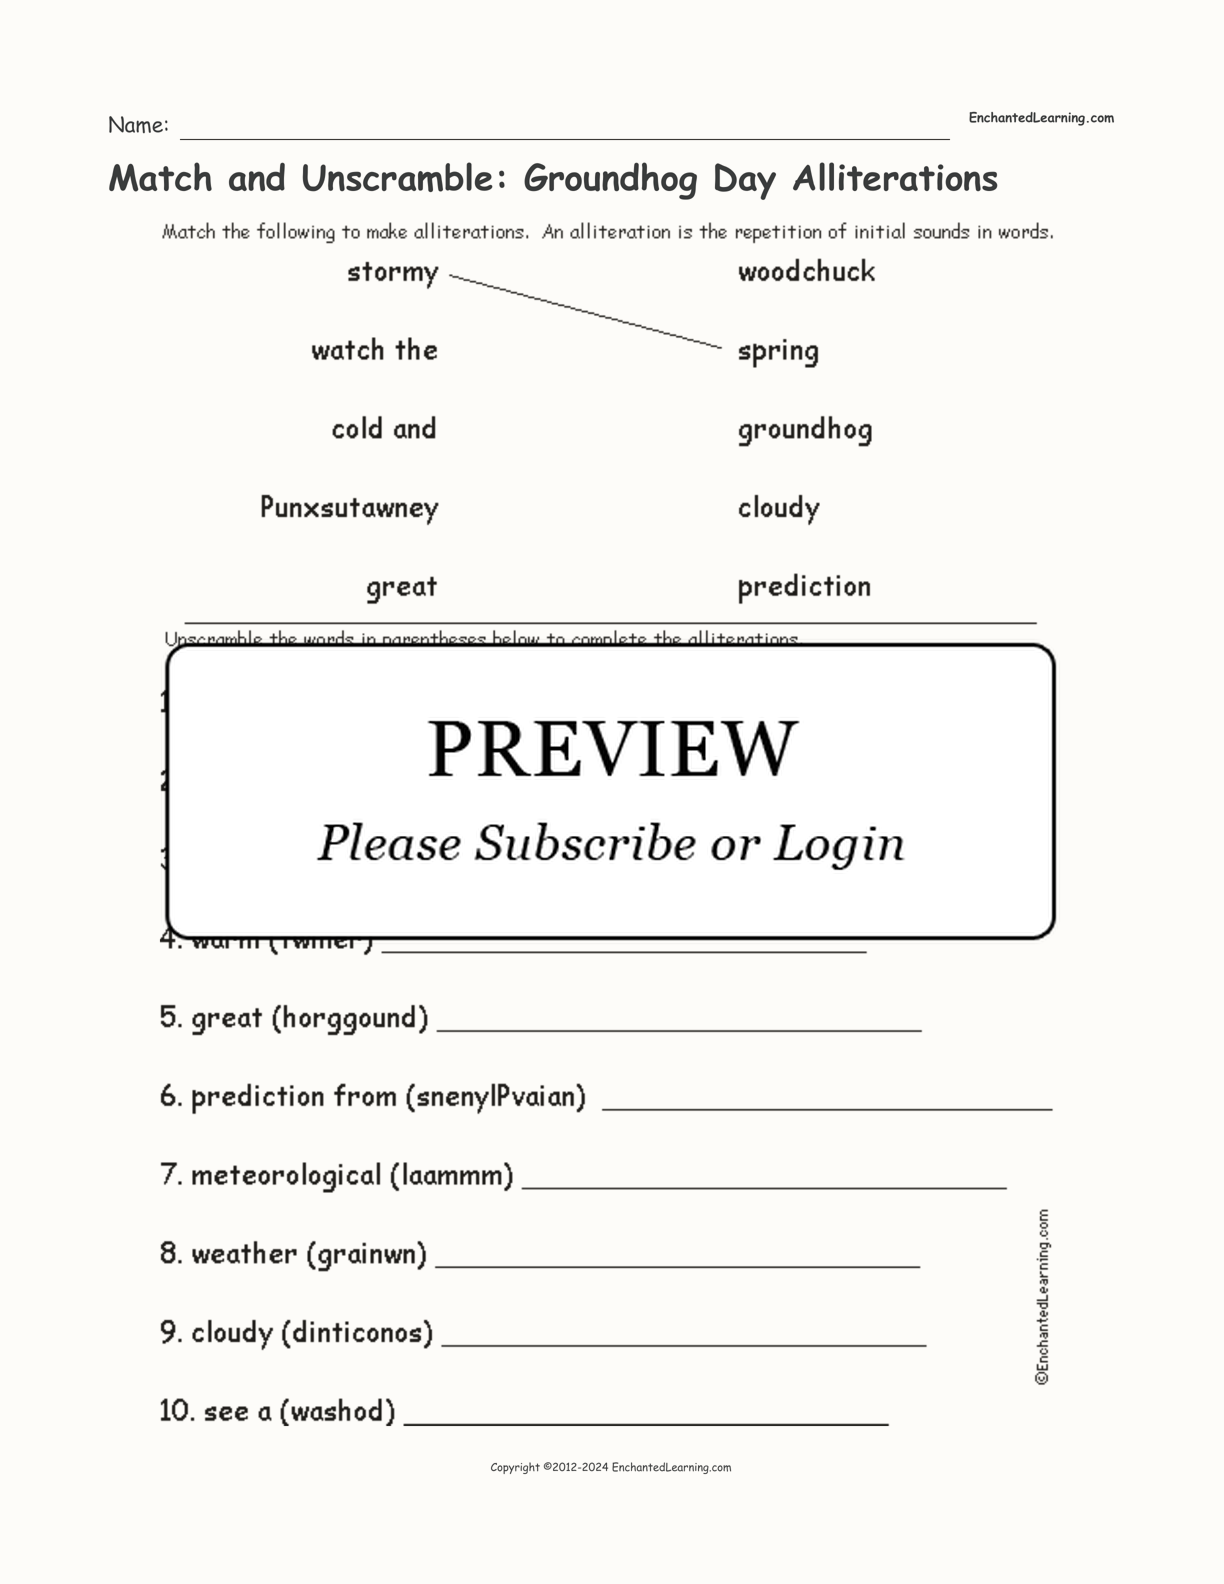 Match and Unscramble: Groundhog Day Alliterations interactive worksheet page 1